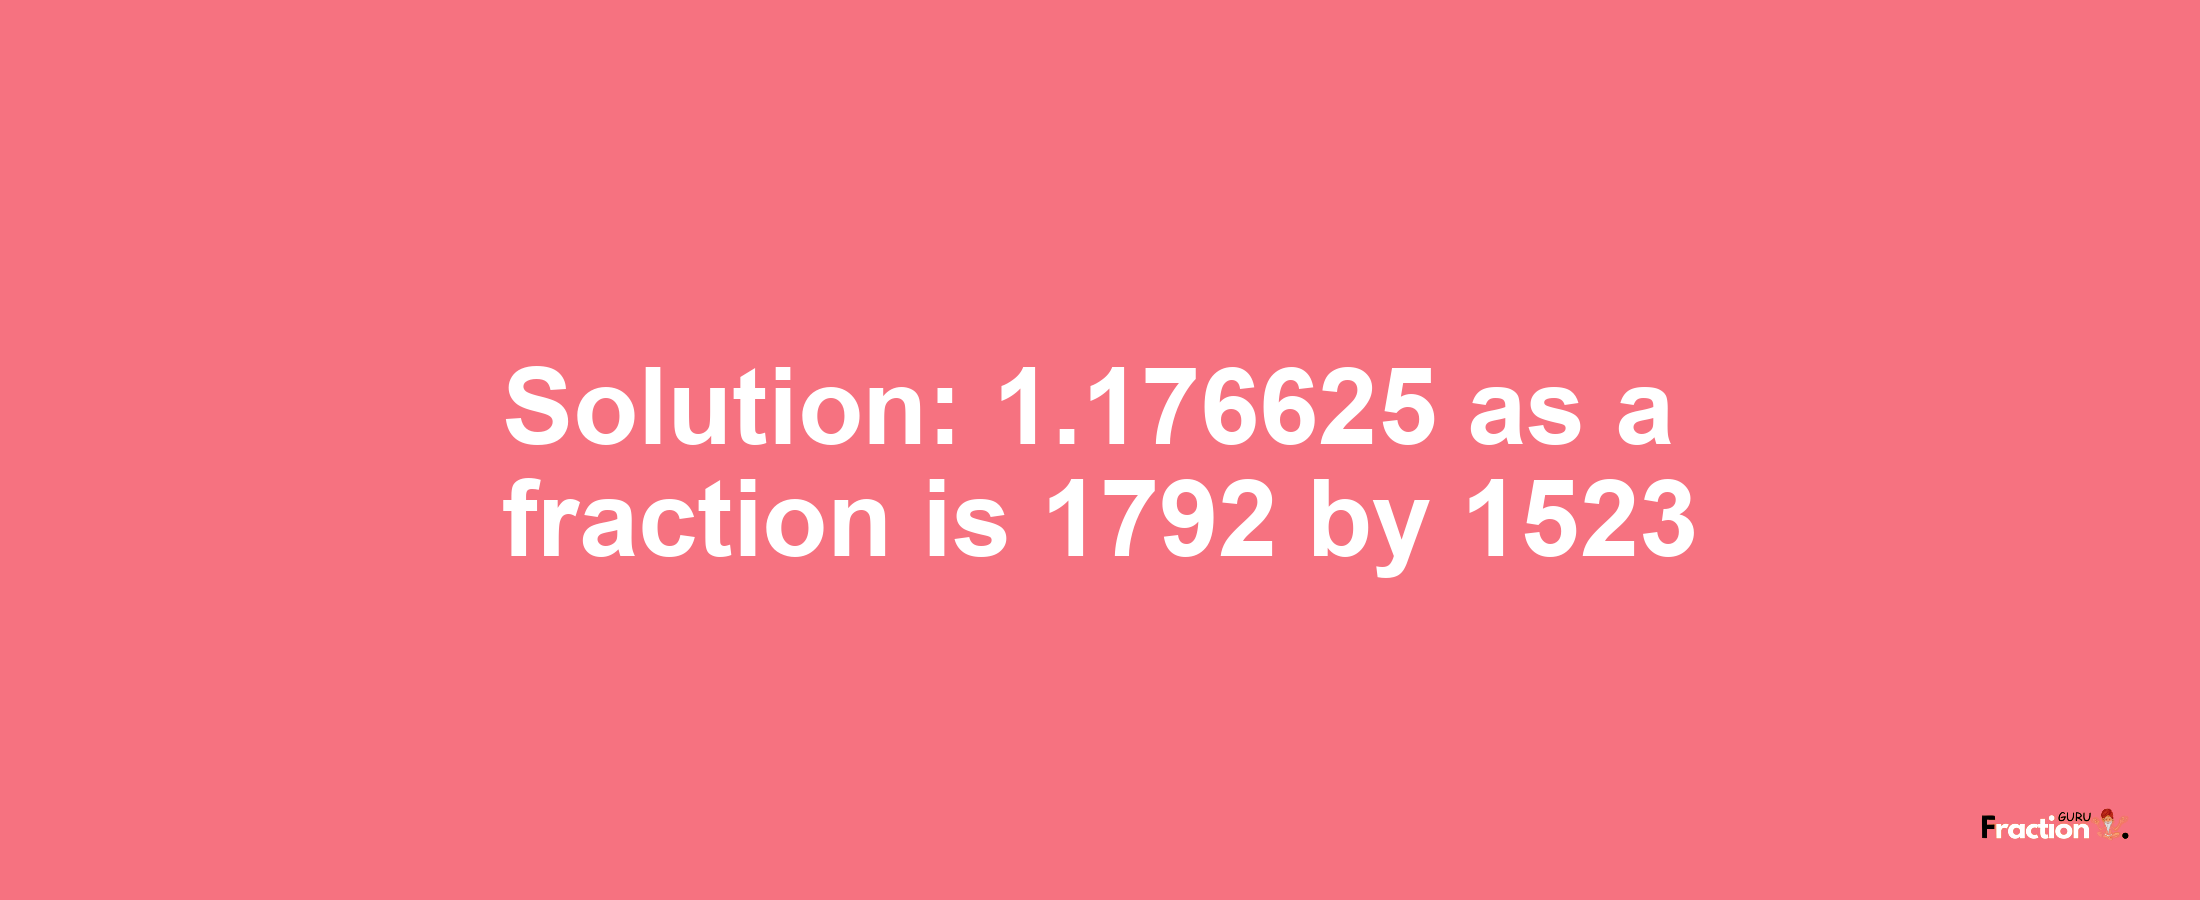 Solution:1.176625 as a fraction is 1792/1523